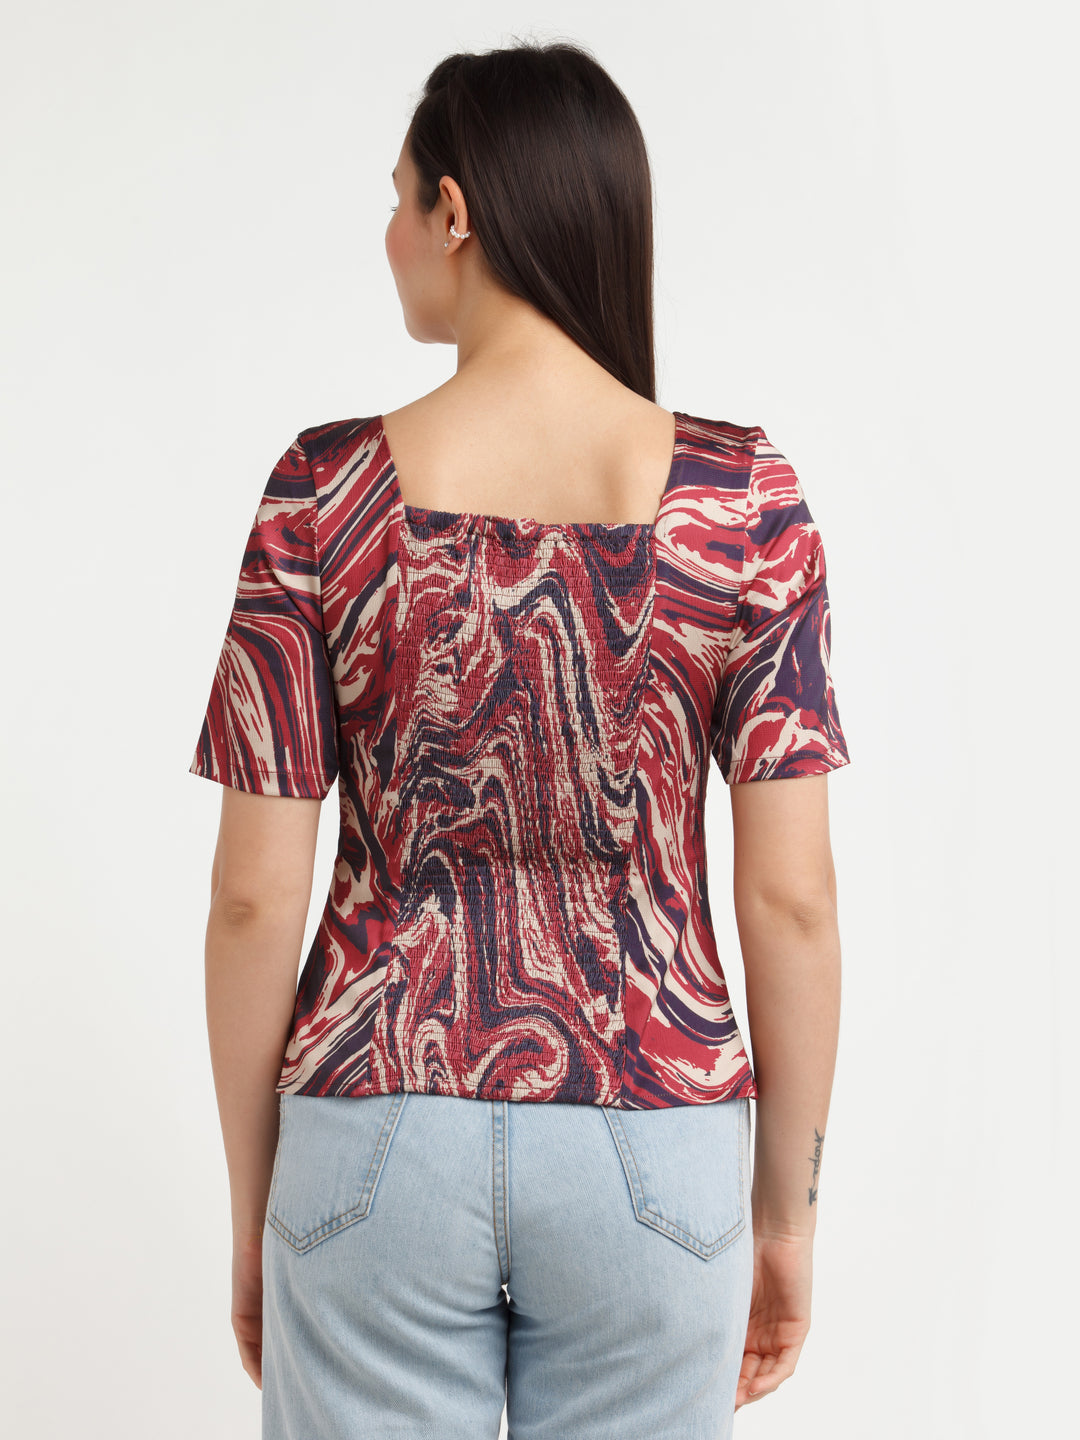 Multi Color Printed Top For Women